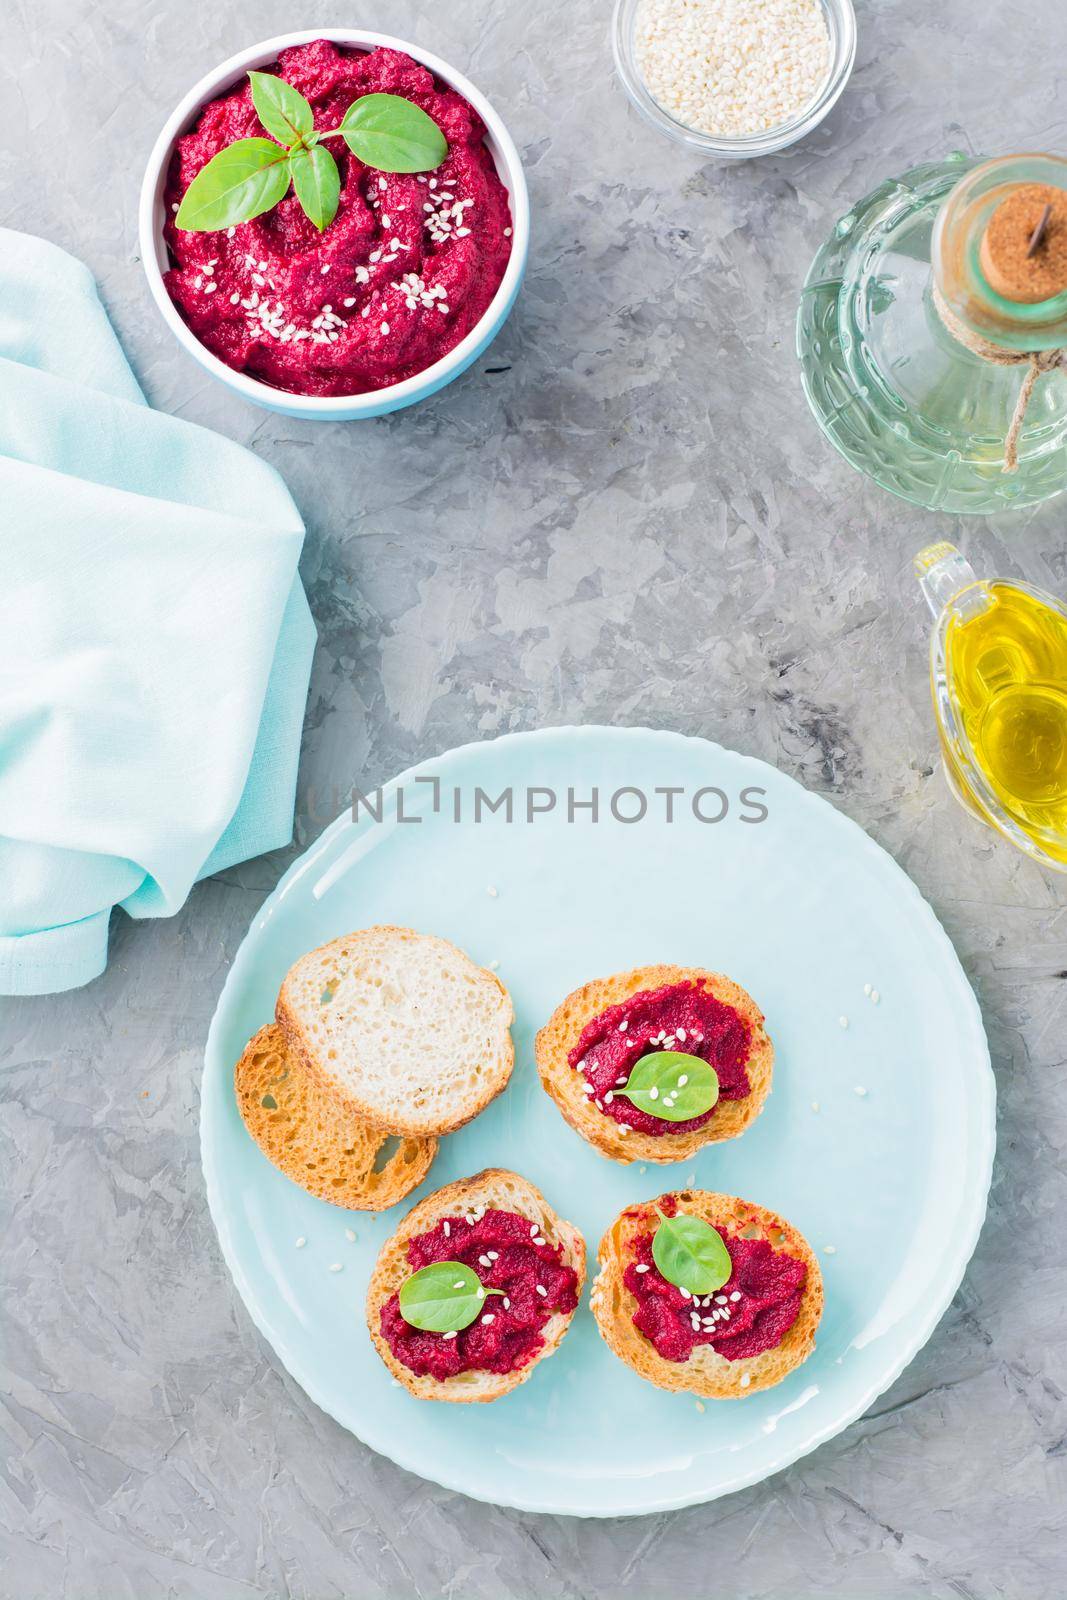 Homemade bruschetta with beetroot hummus on small baked baguette toast on a plate and a bowl of hummus on the table. Vertical and top view